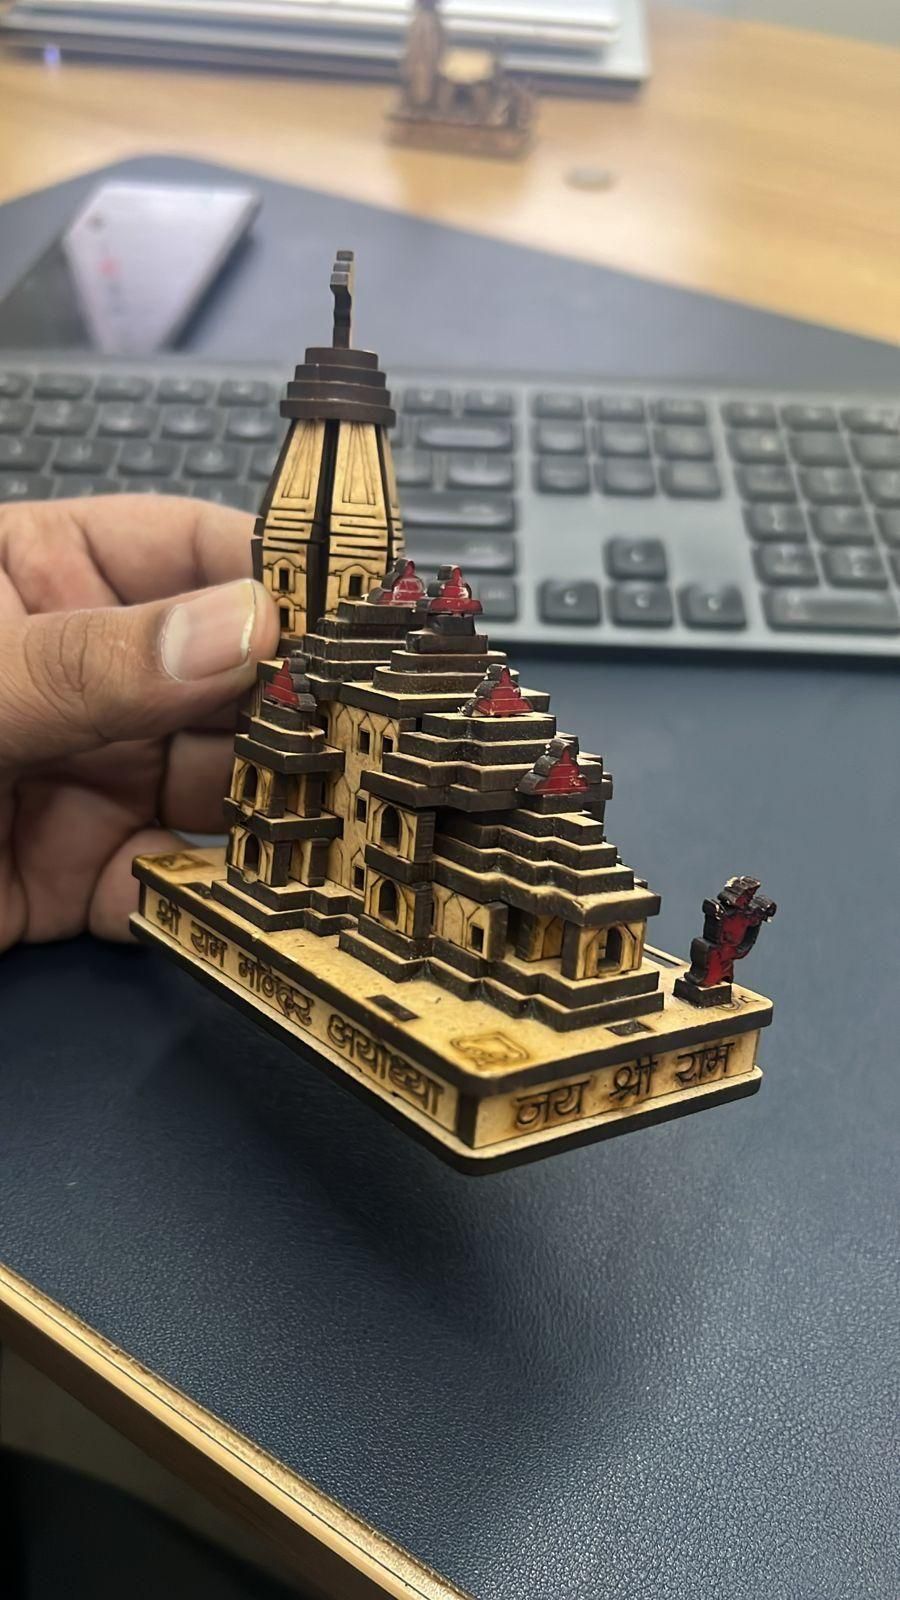 🚩🚩Ram Mandir For Your Home 🚩🚩 Decorative Showpiece Wood Temple for Gift🏹